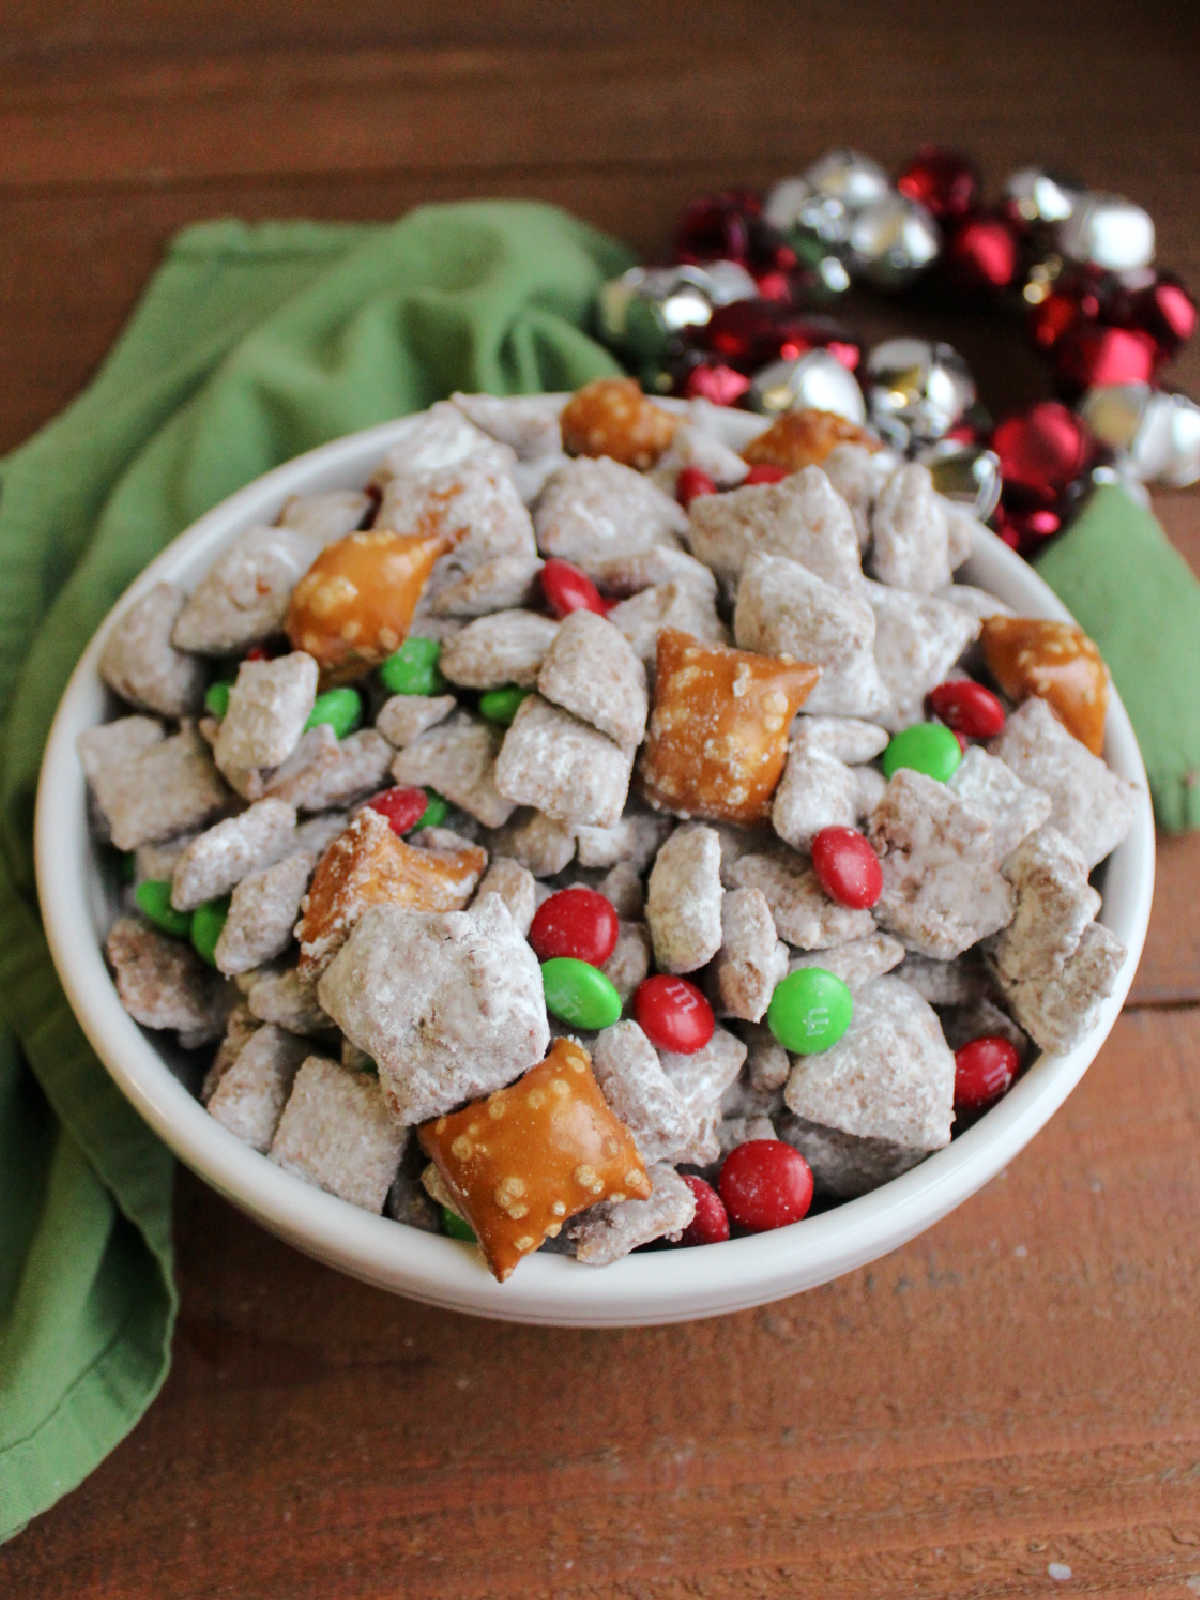 Loaded puppy chow with peanut butter filled pretzels and holiday M&Ms inside, ready to eat. 